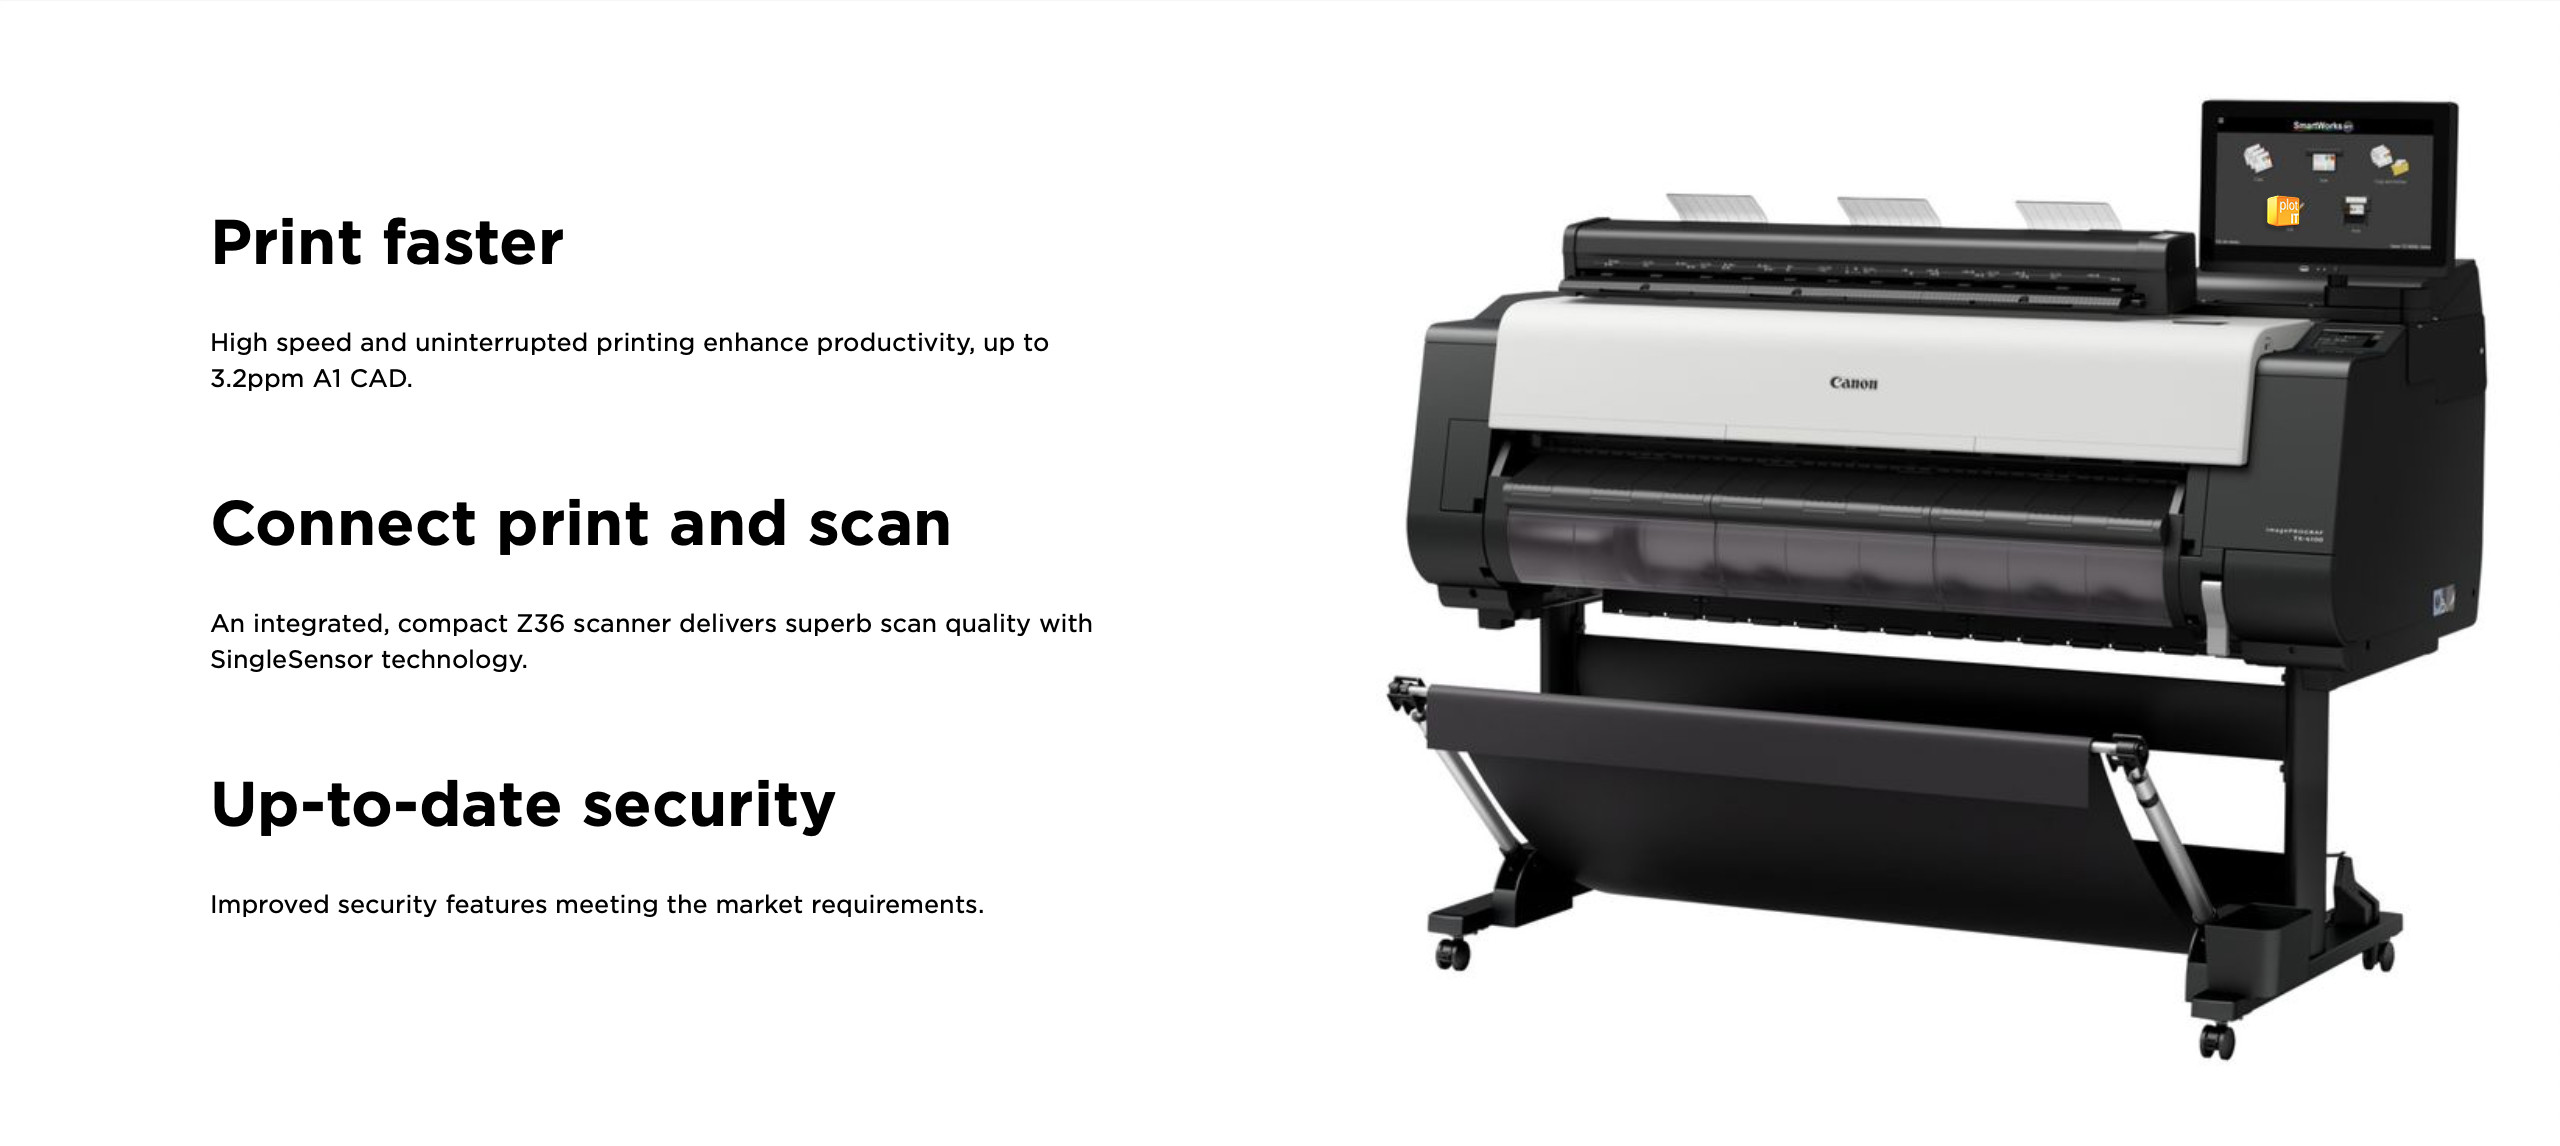 TX-4100 MFP Z36 MAIN FEATURES